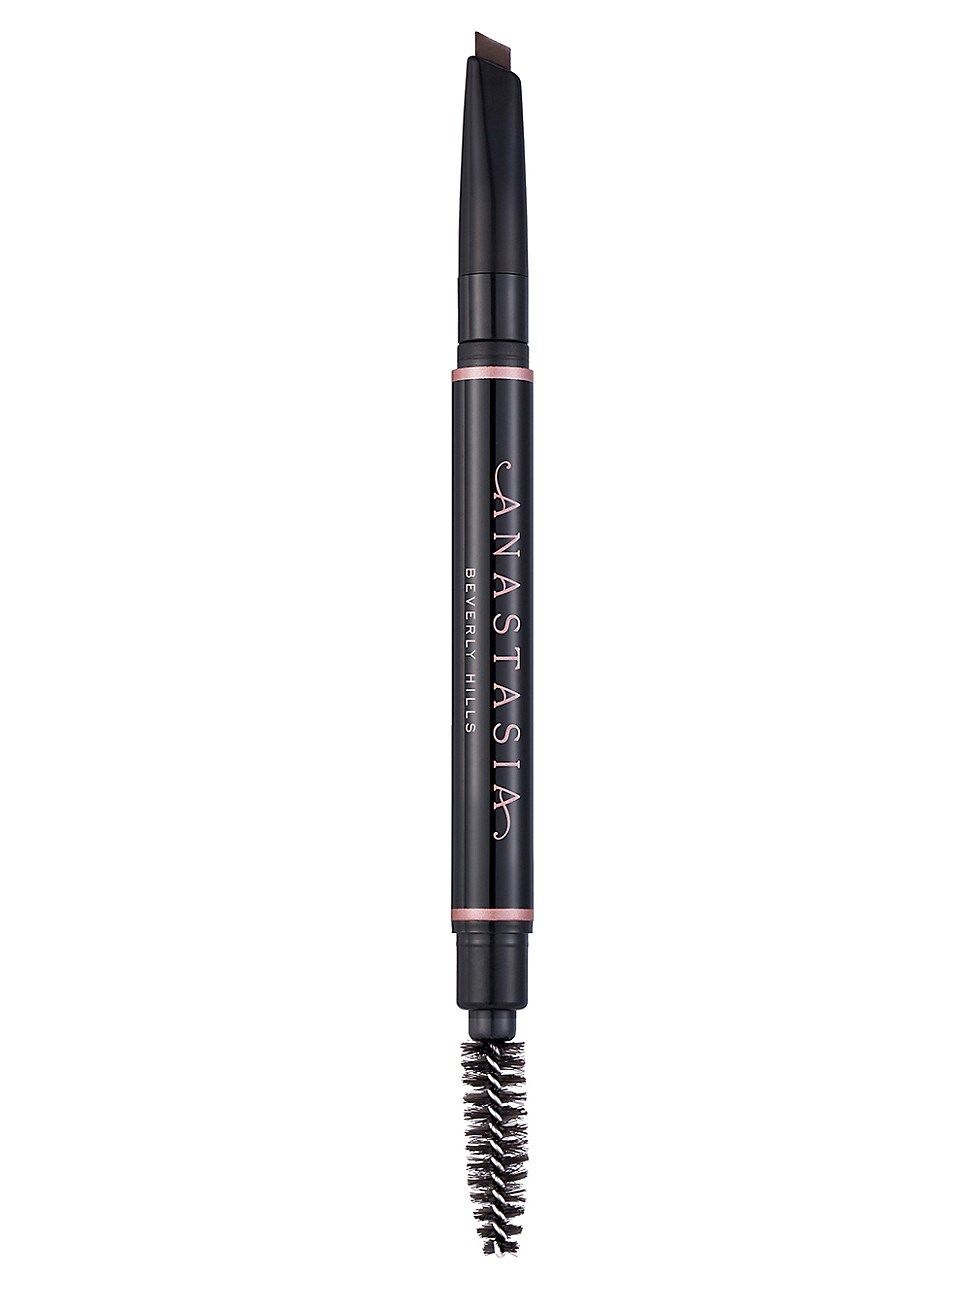 A1 Pro Brush Brow Definer | Saks Fifth Avenue